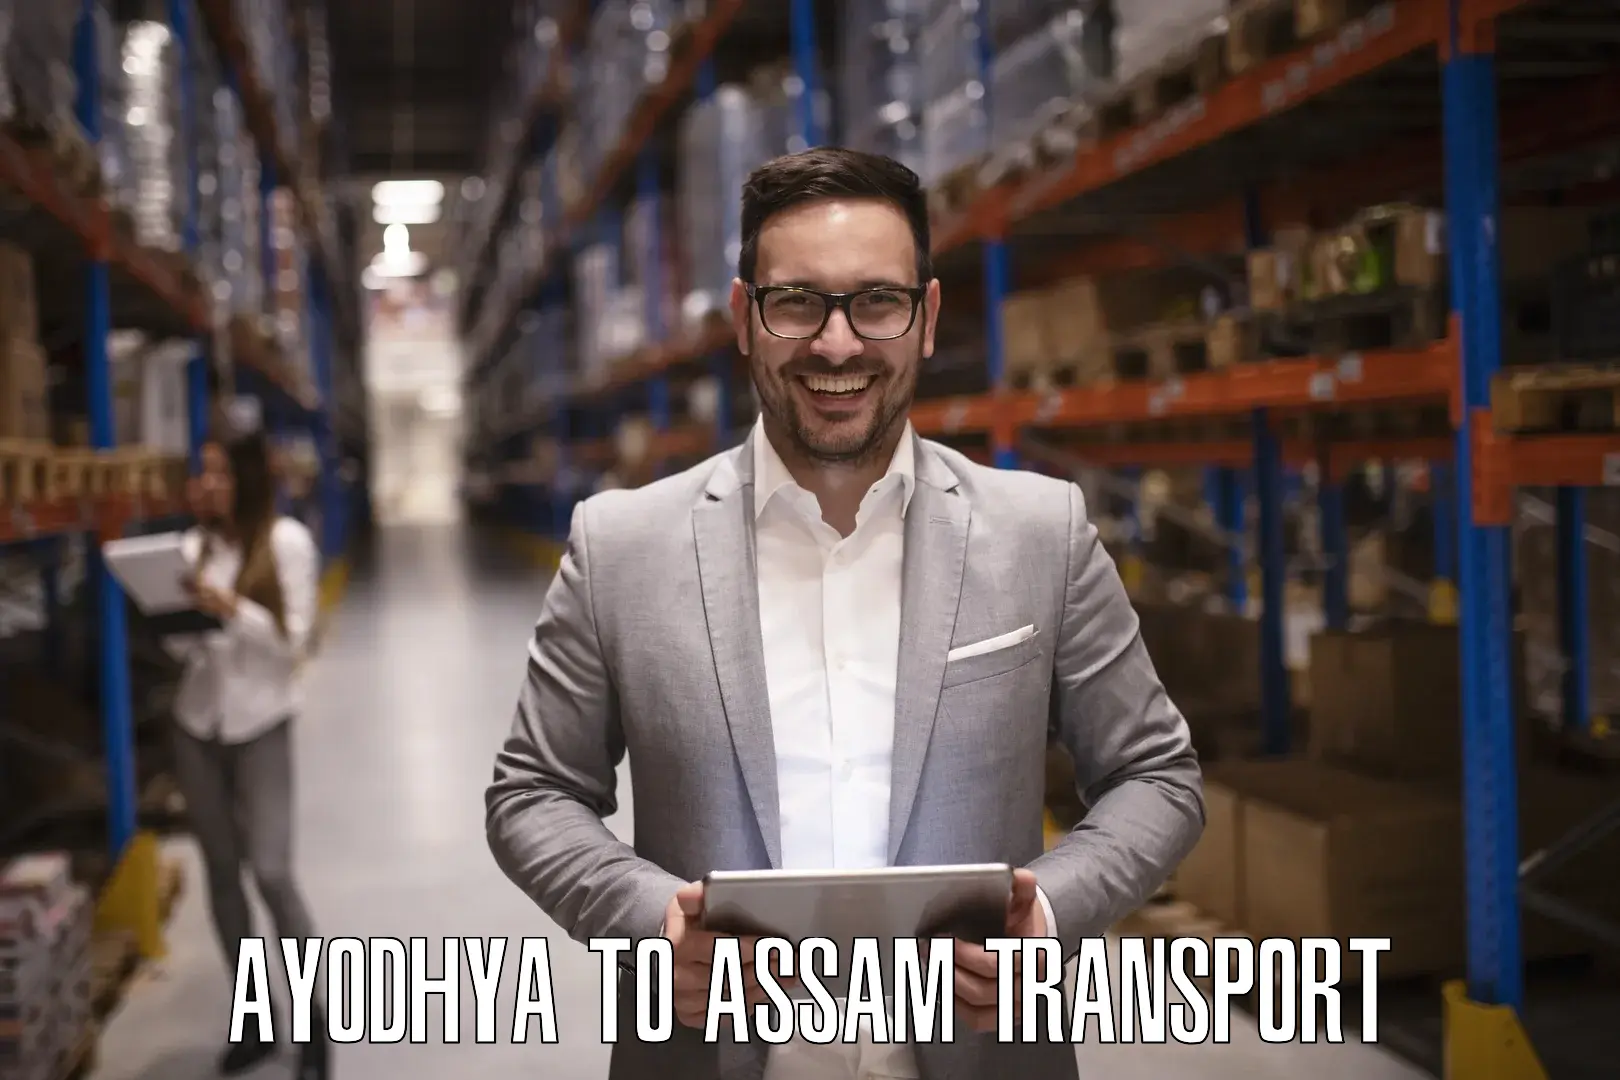 Transport shared services Ayodhya to Assam